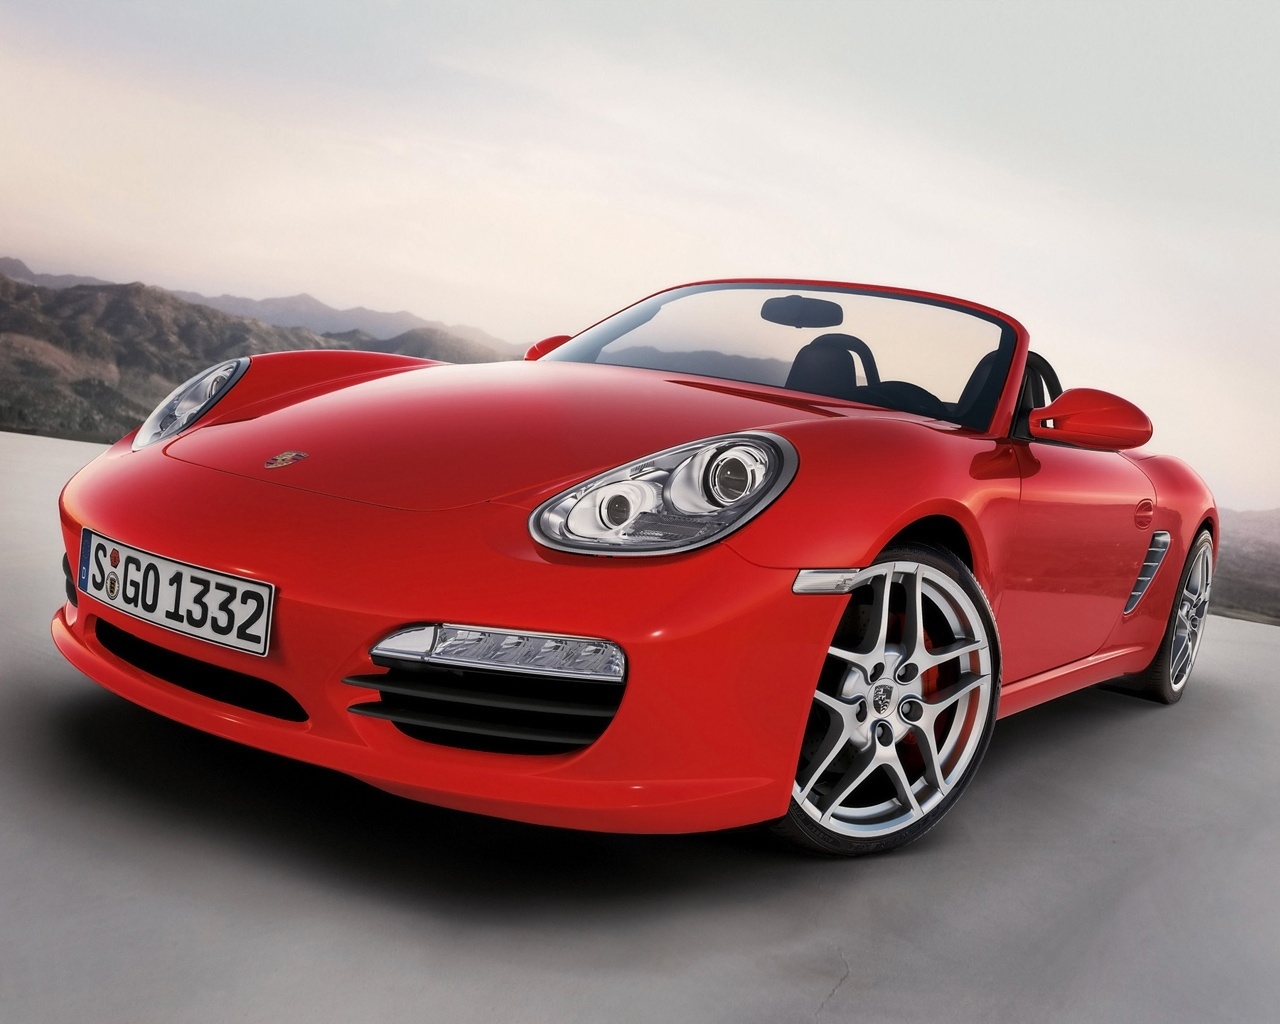 Porsche Boxster S 2009 Red for 1280 x 1024 resolution